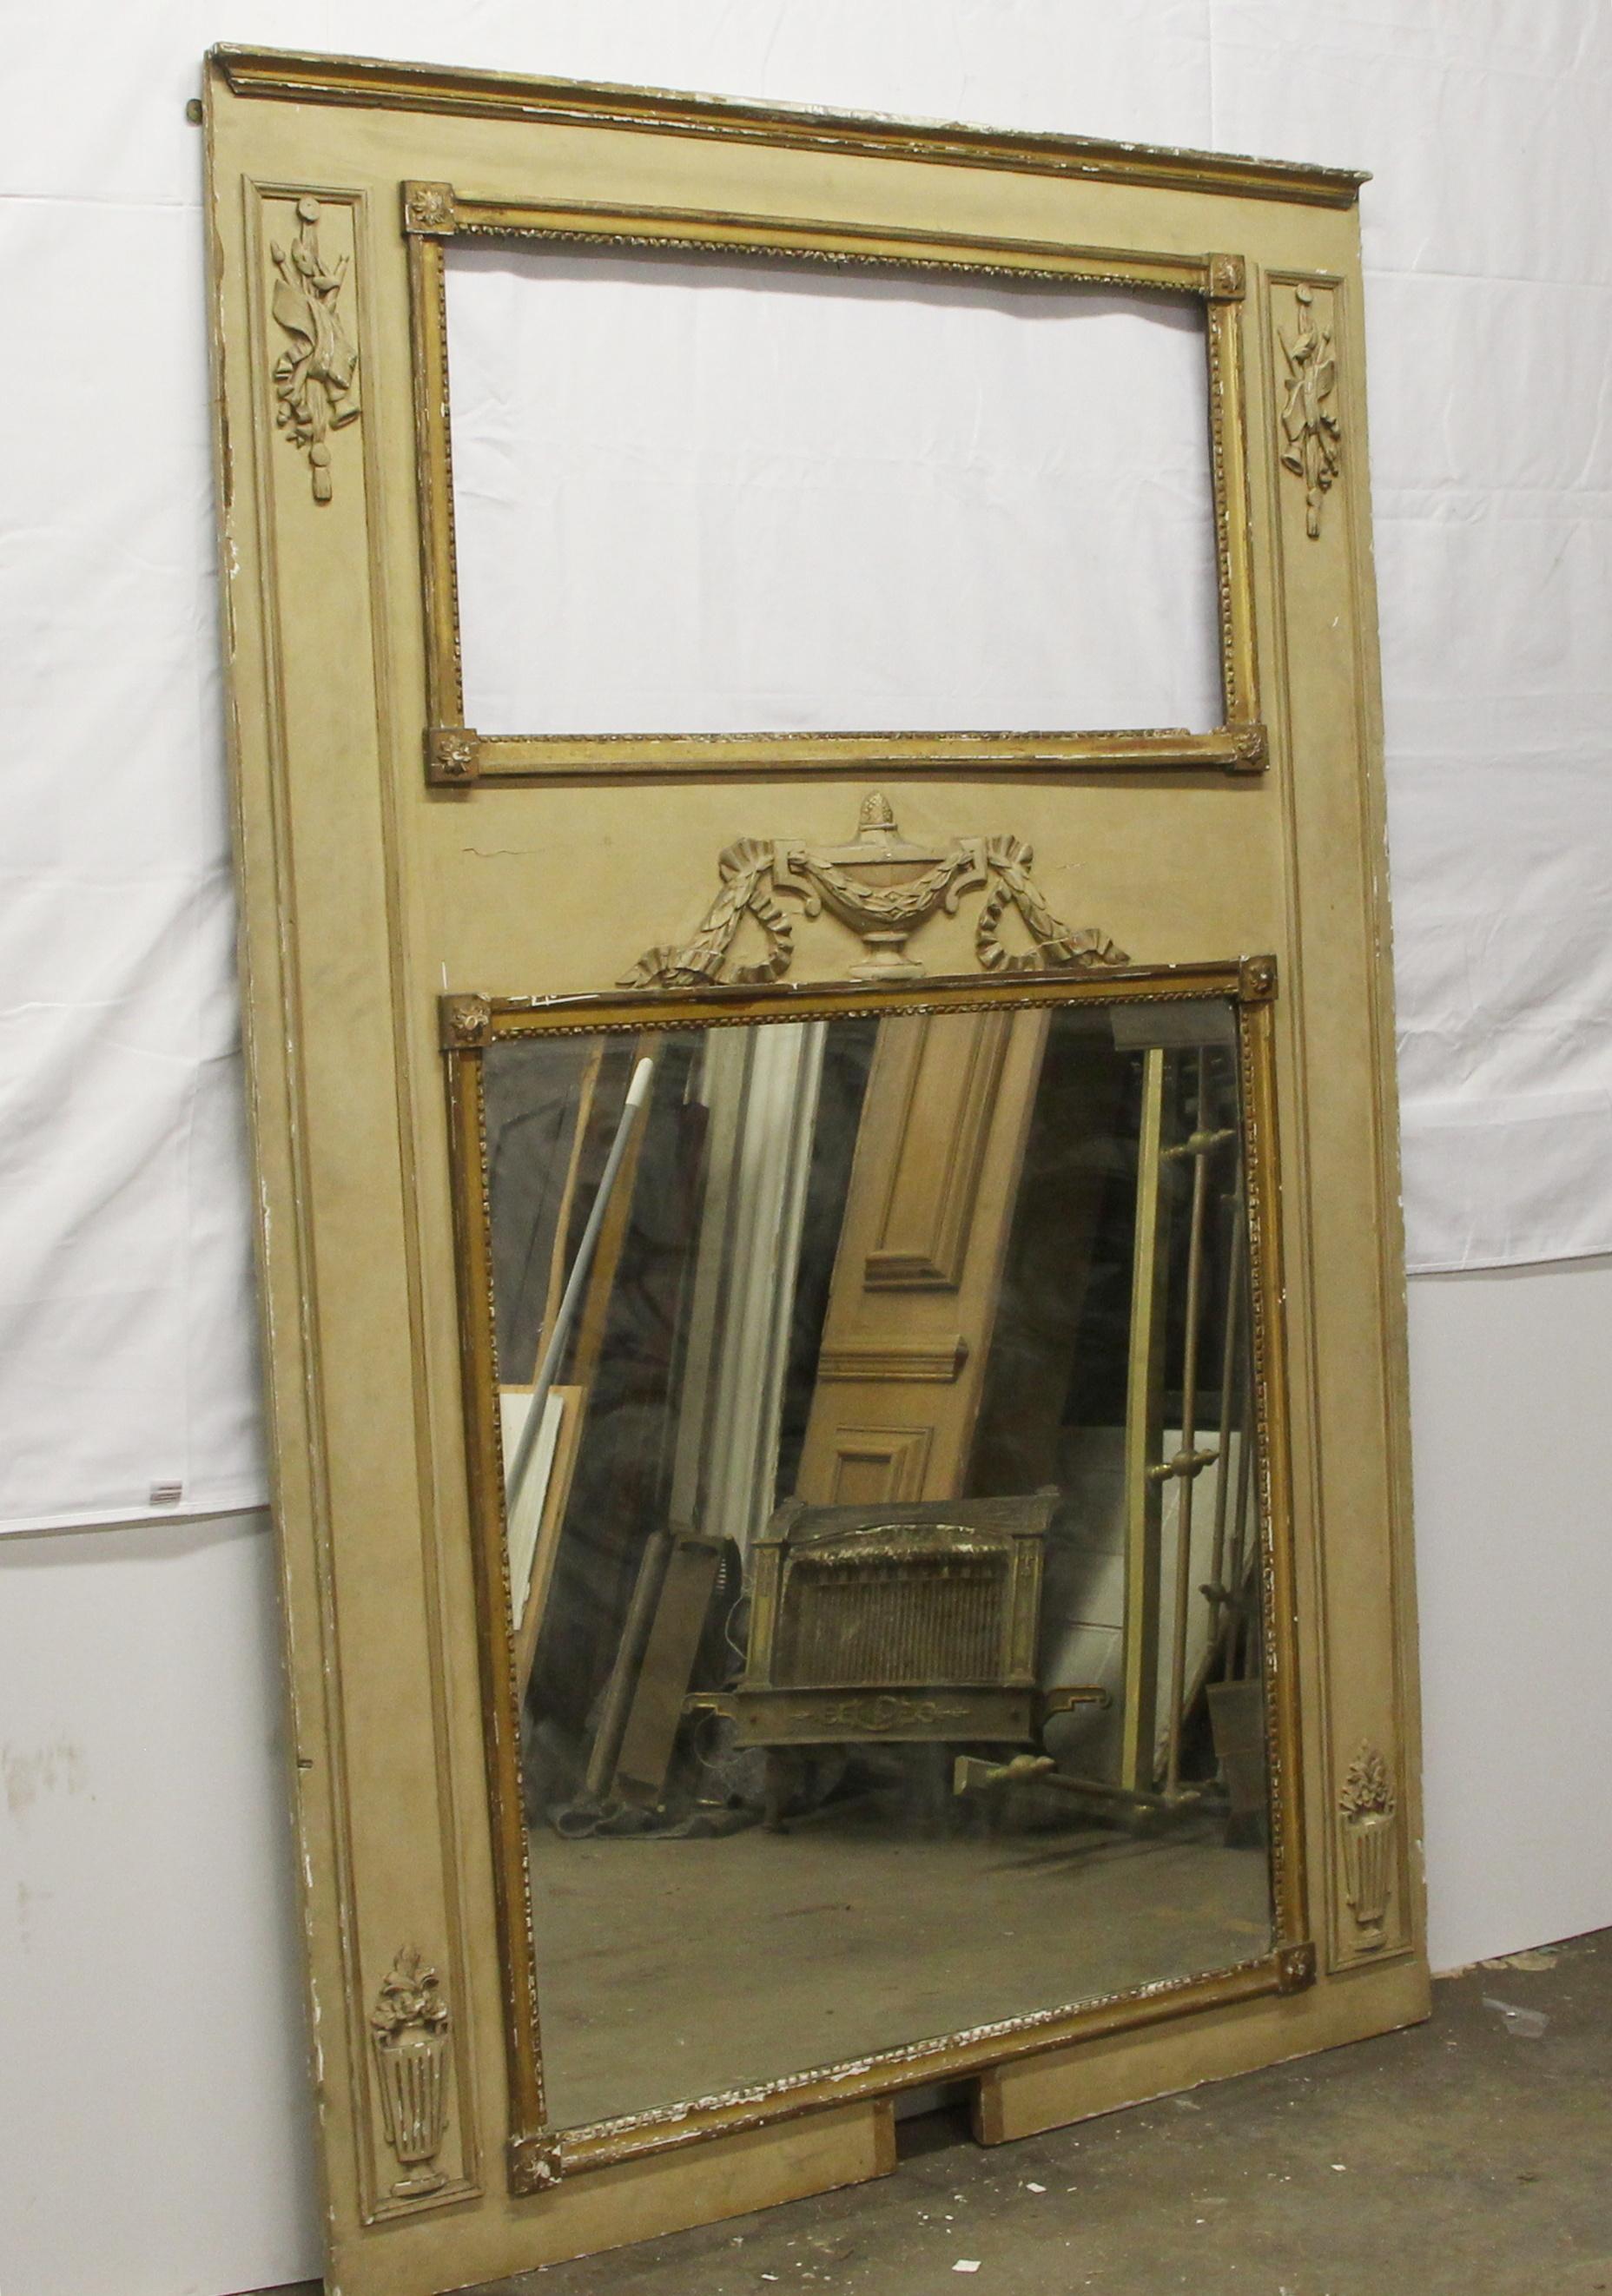 NYC Waldorf Astoria Hotel over mantel mirror from the original 1930 hotel design installation. From France. The mirror and frame details are intact although with some damage. The open space at the top originally had a canvas painting which can be